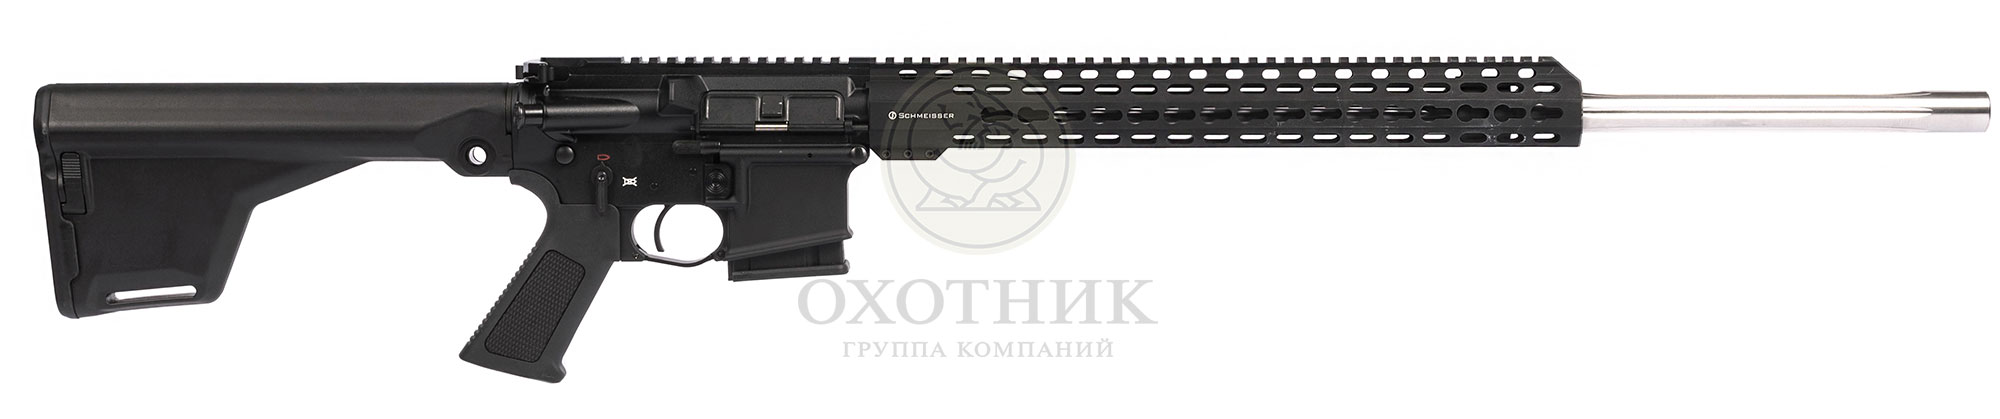 КАРАБИН SCHMEISSER AR15 ULTRAMATCH STS KEY 24 '' STAINLESS 223 REM- фото № 1